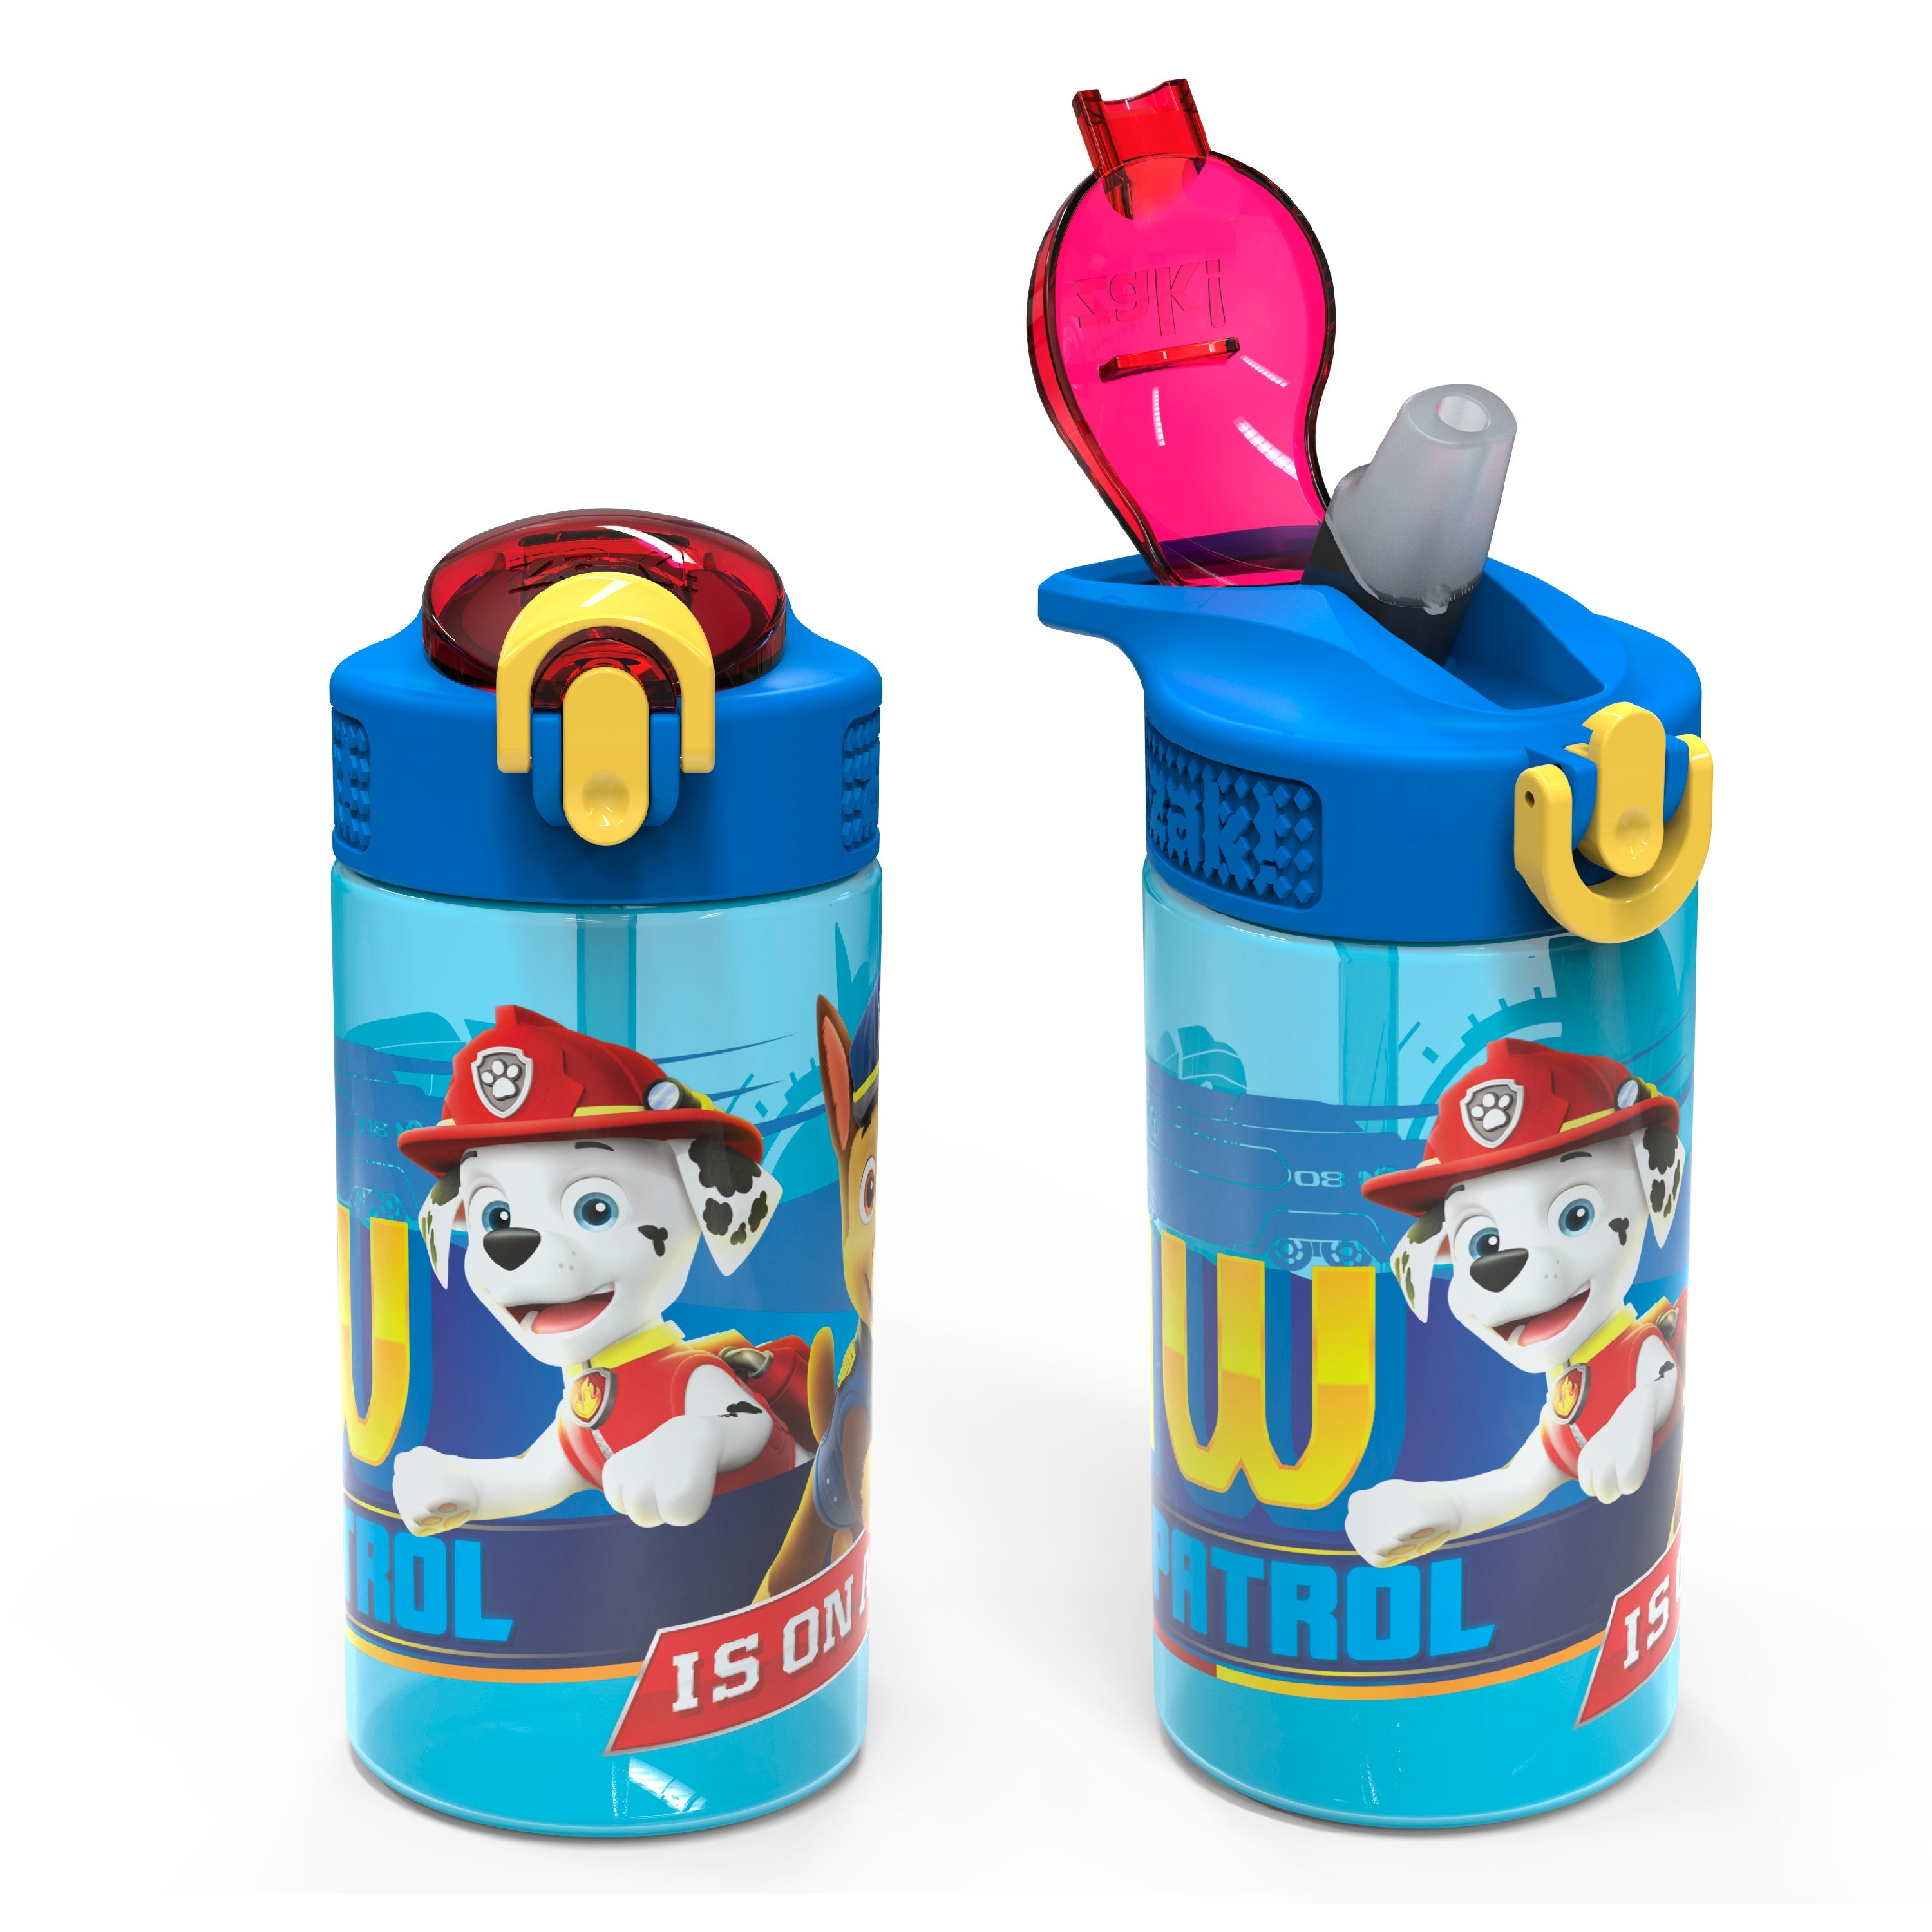 Paw Patrol Chase Kids Plastic Water Bottle with Leak Proof Lid and Spout - 2 Pack, 16 ounce